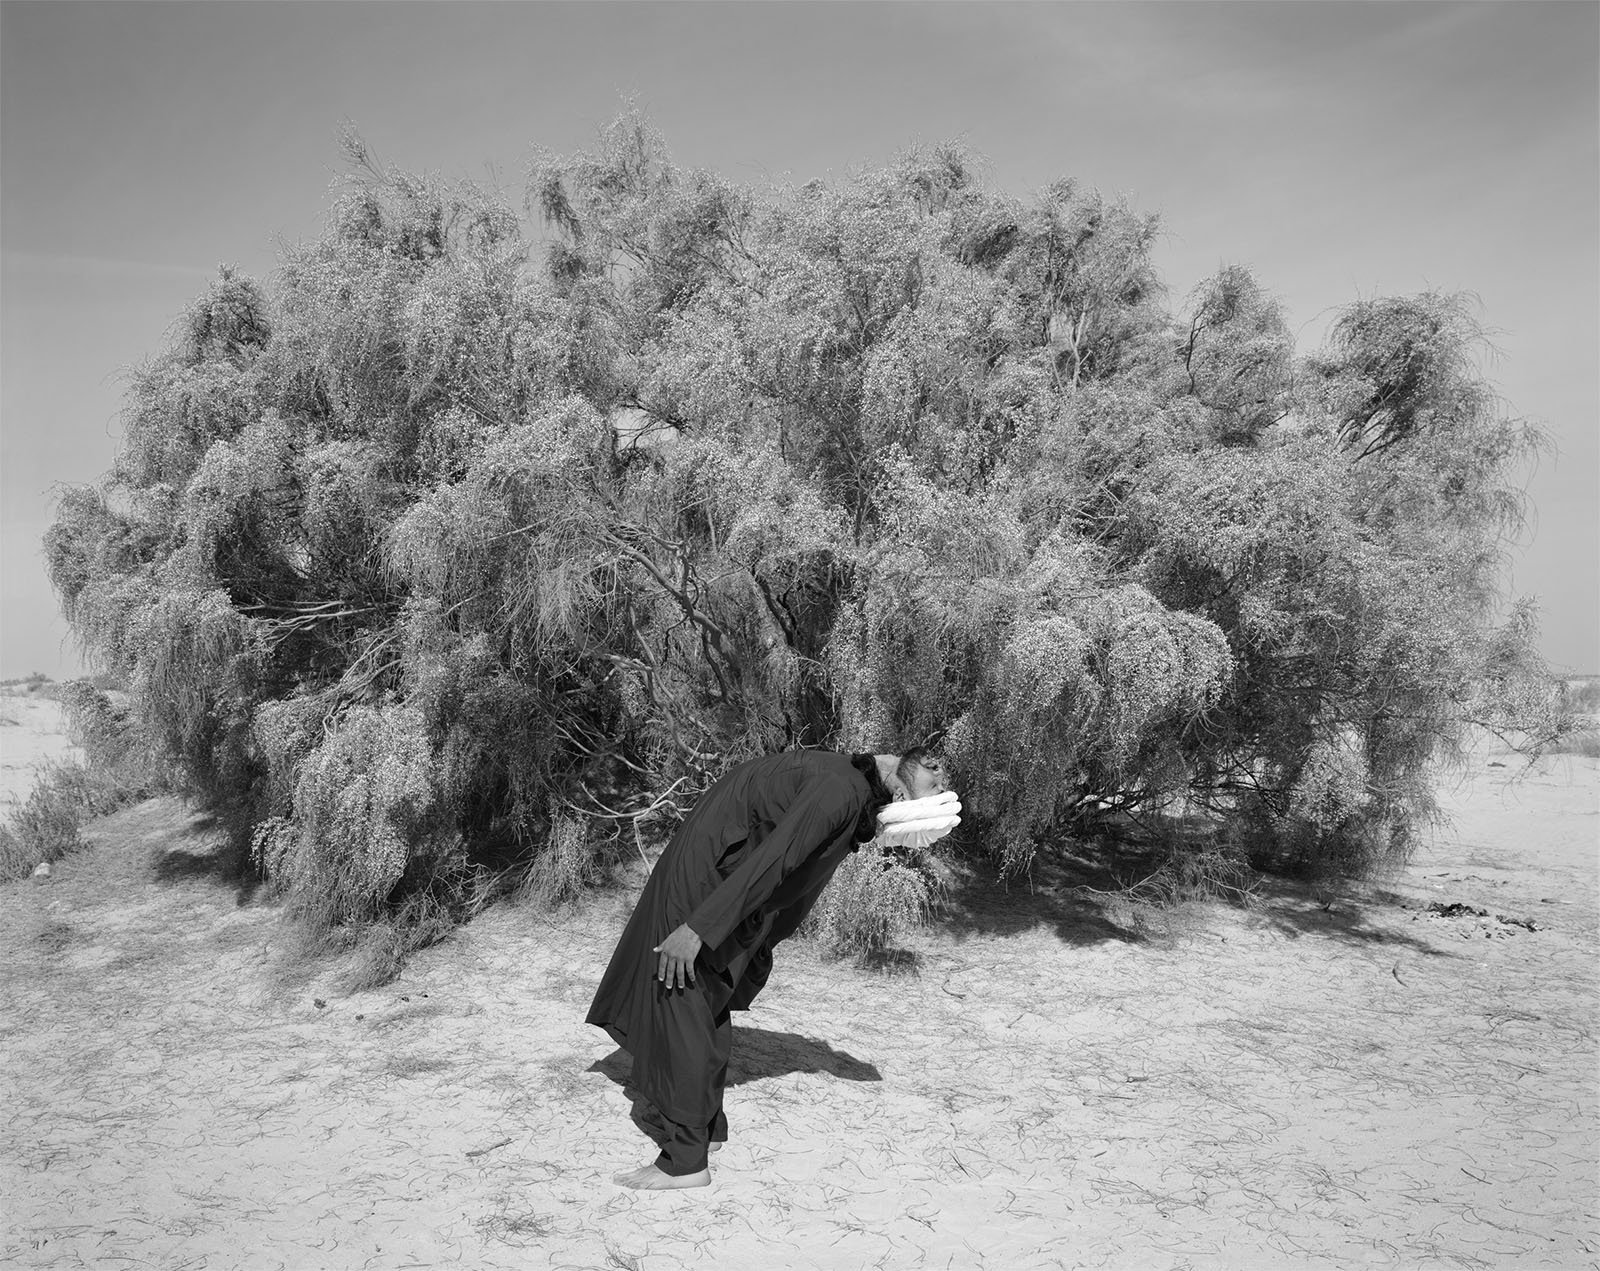 A surreal black and white photograph depicting a person in a long coat bending backward dramatically to merge with a large, dense bush in a barren landscape.